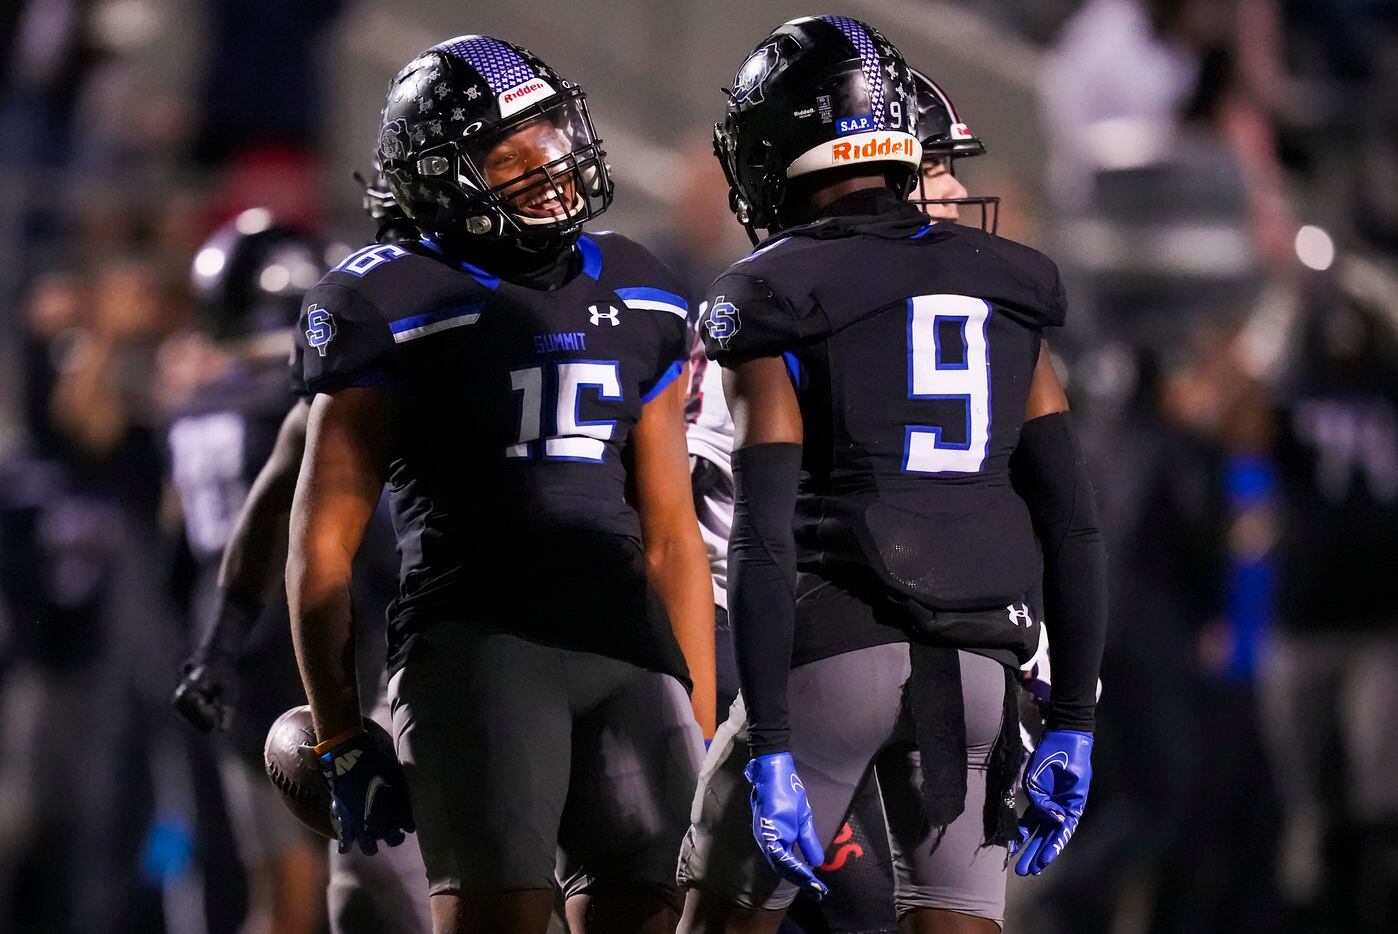 Mansfield Summit defensive back Justyn McDonald (15) celebrates with defensive back Tavare Smith Jr. (9) after intercepting a pass during the first half of the Class 5A Division I Region I final against Colleyville Heritage on Friday, Dec. 3, 2021, in North Richland Hills, Texas. (Smiley N. Pool/The Dallas Morning News)